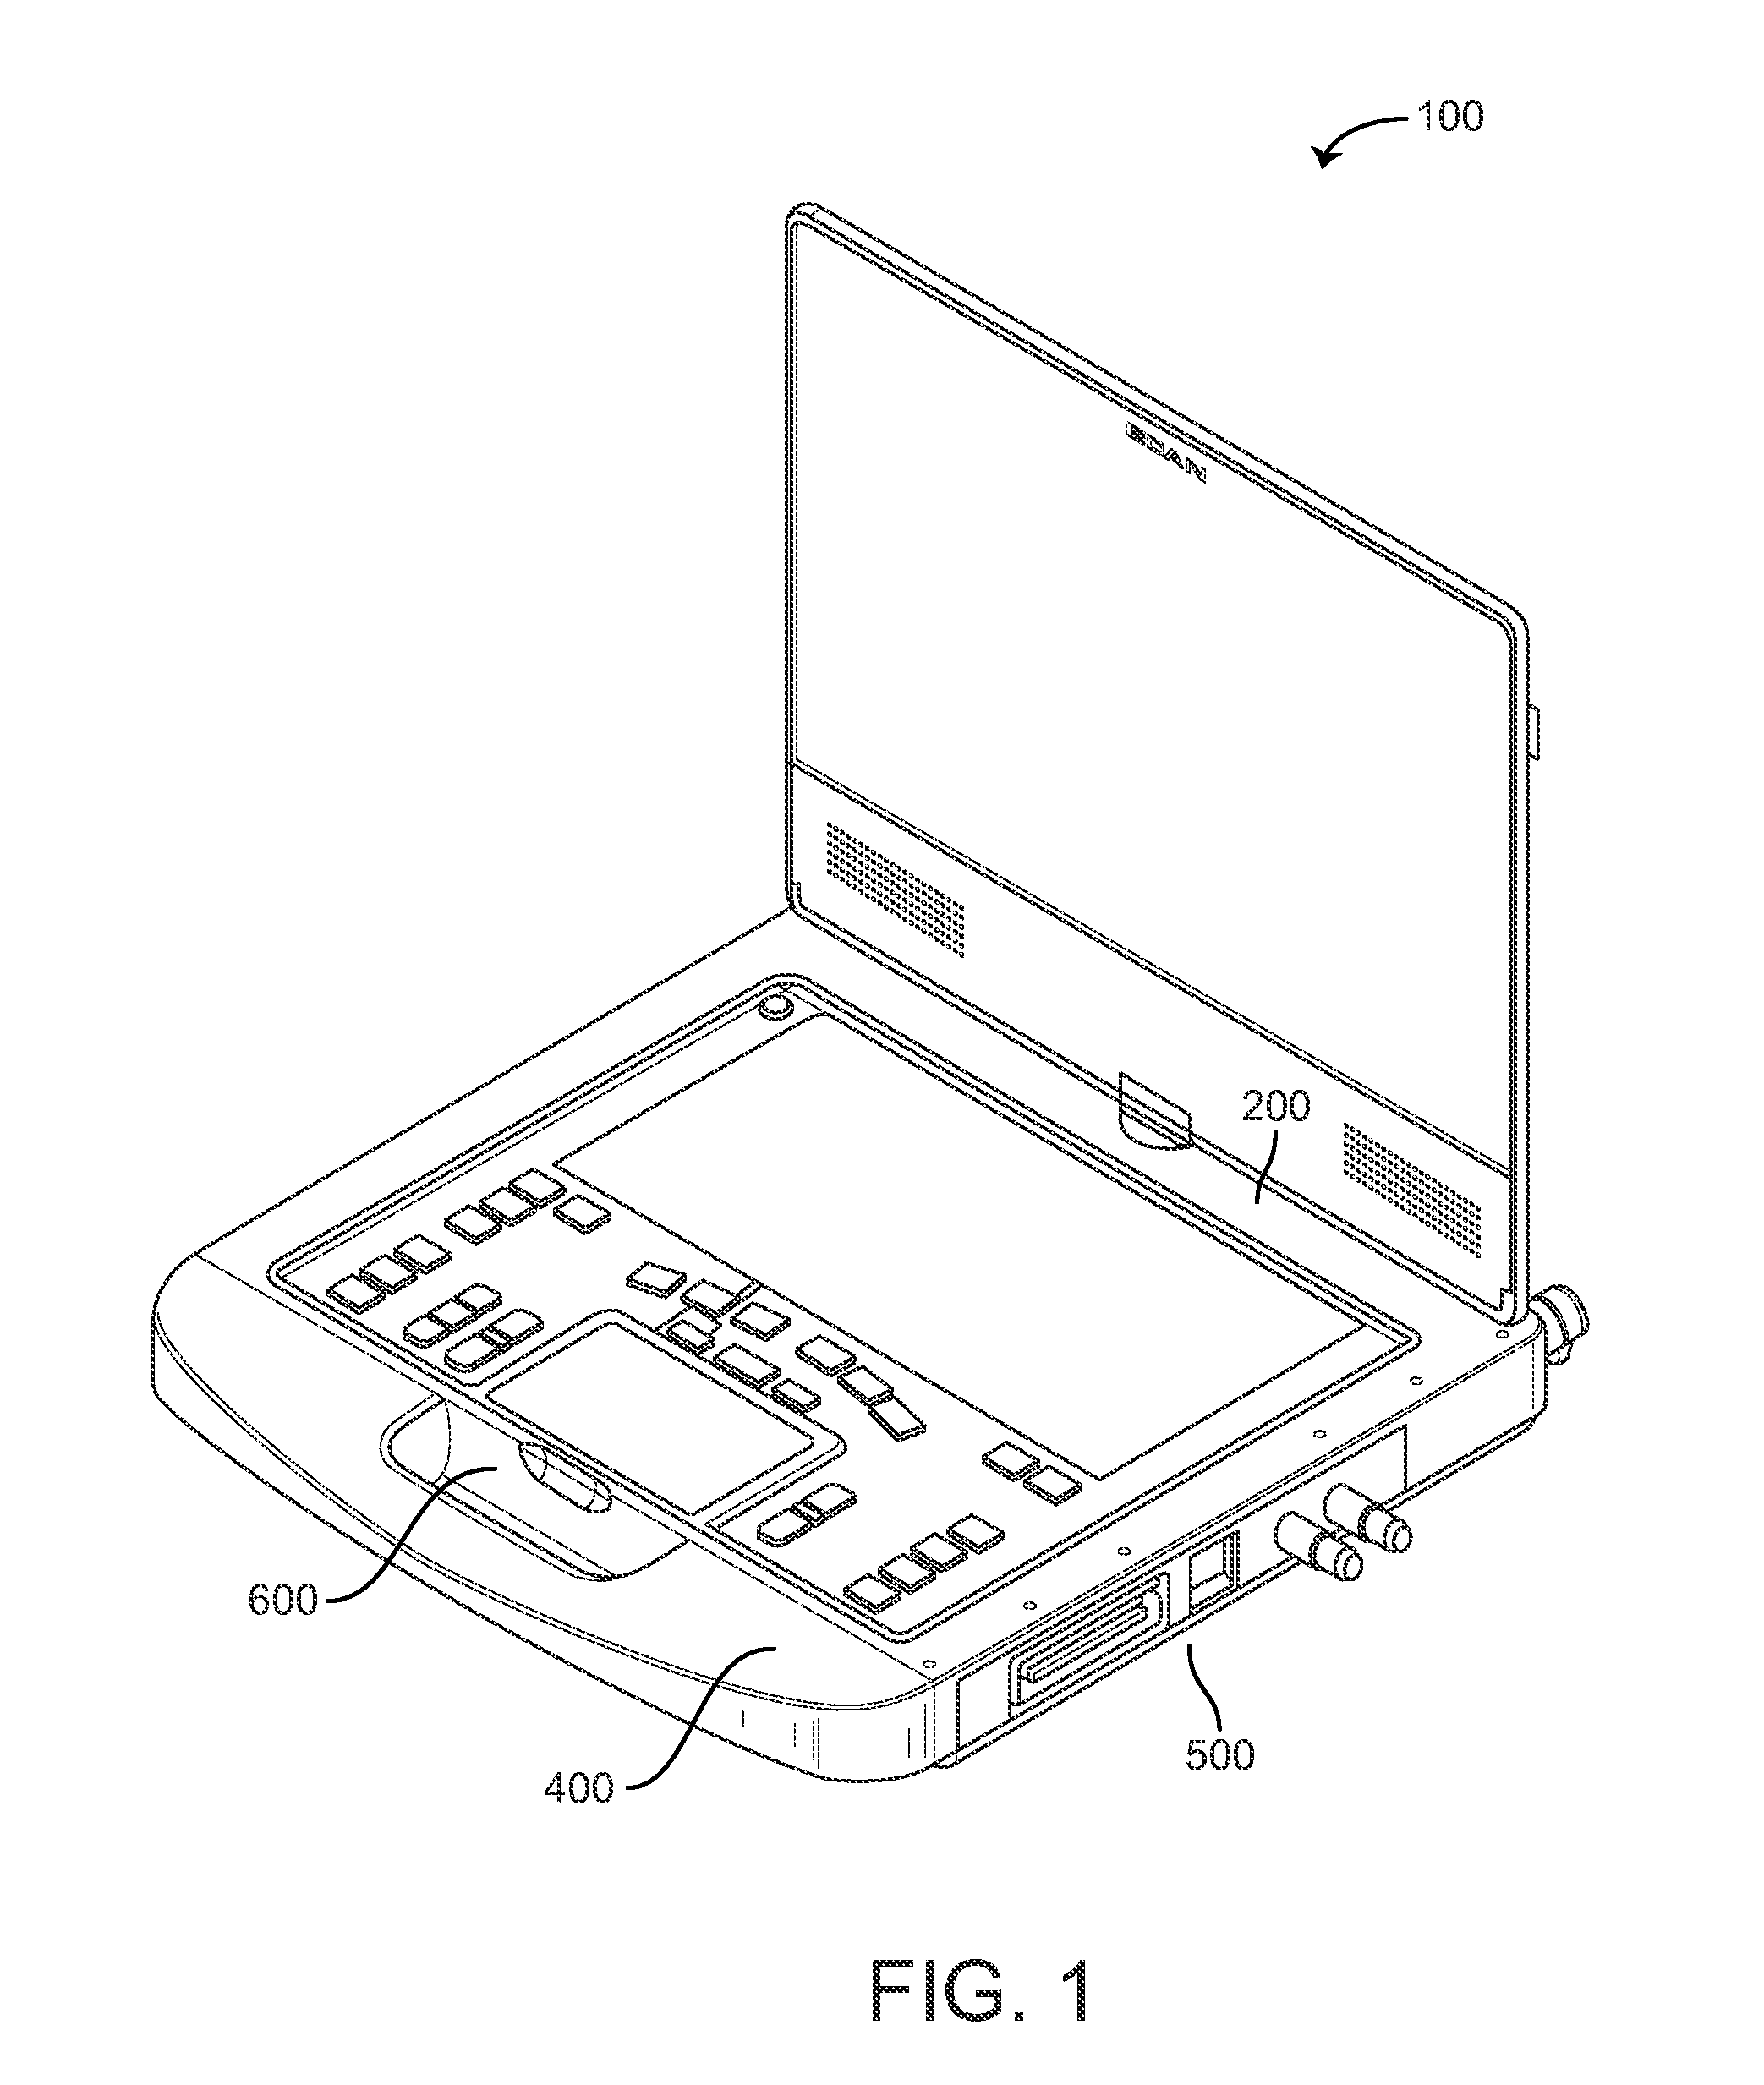 Portable ultrasound user interface and resource management systems and methods